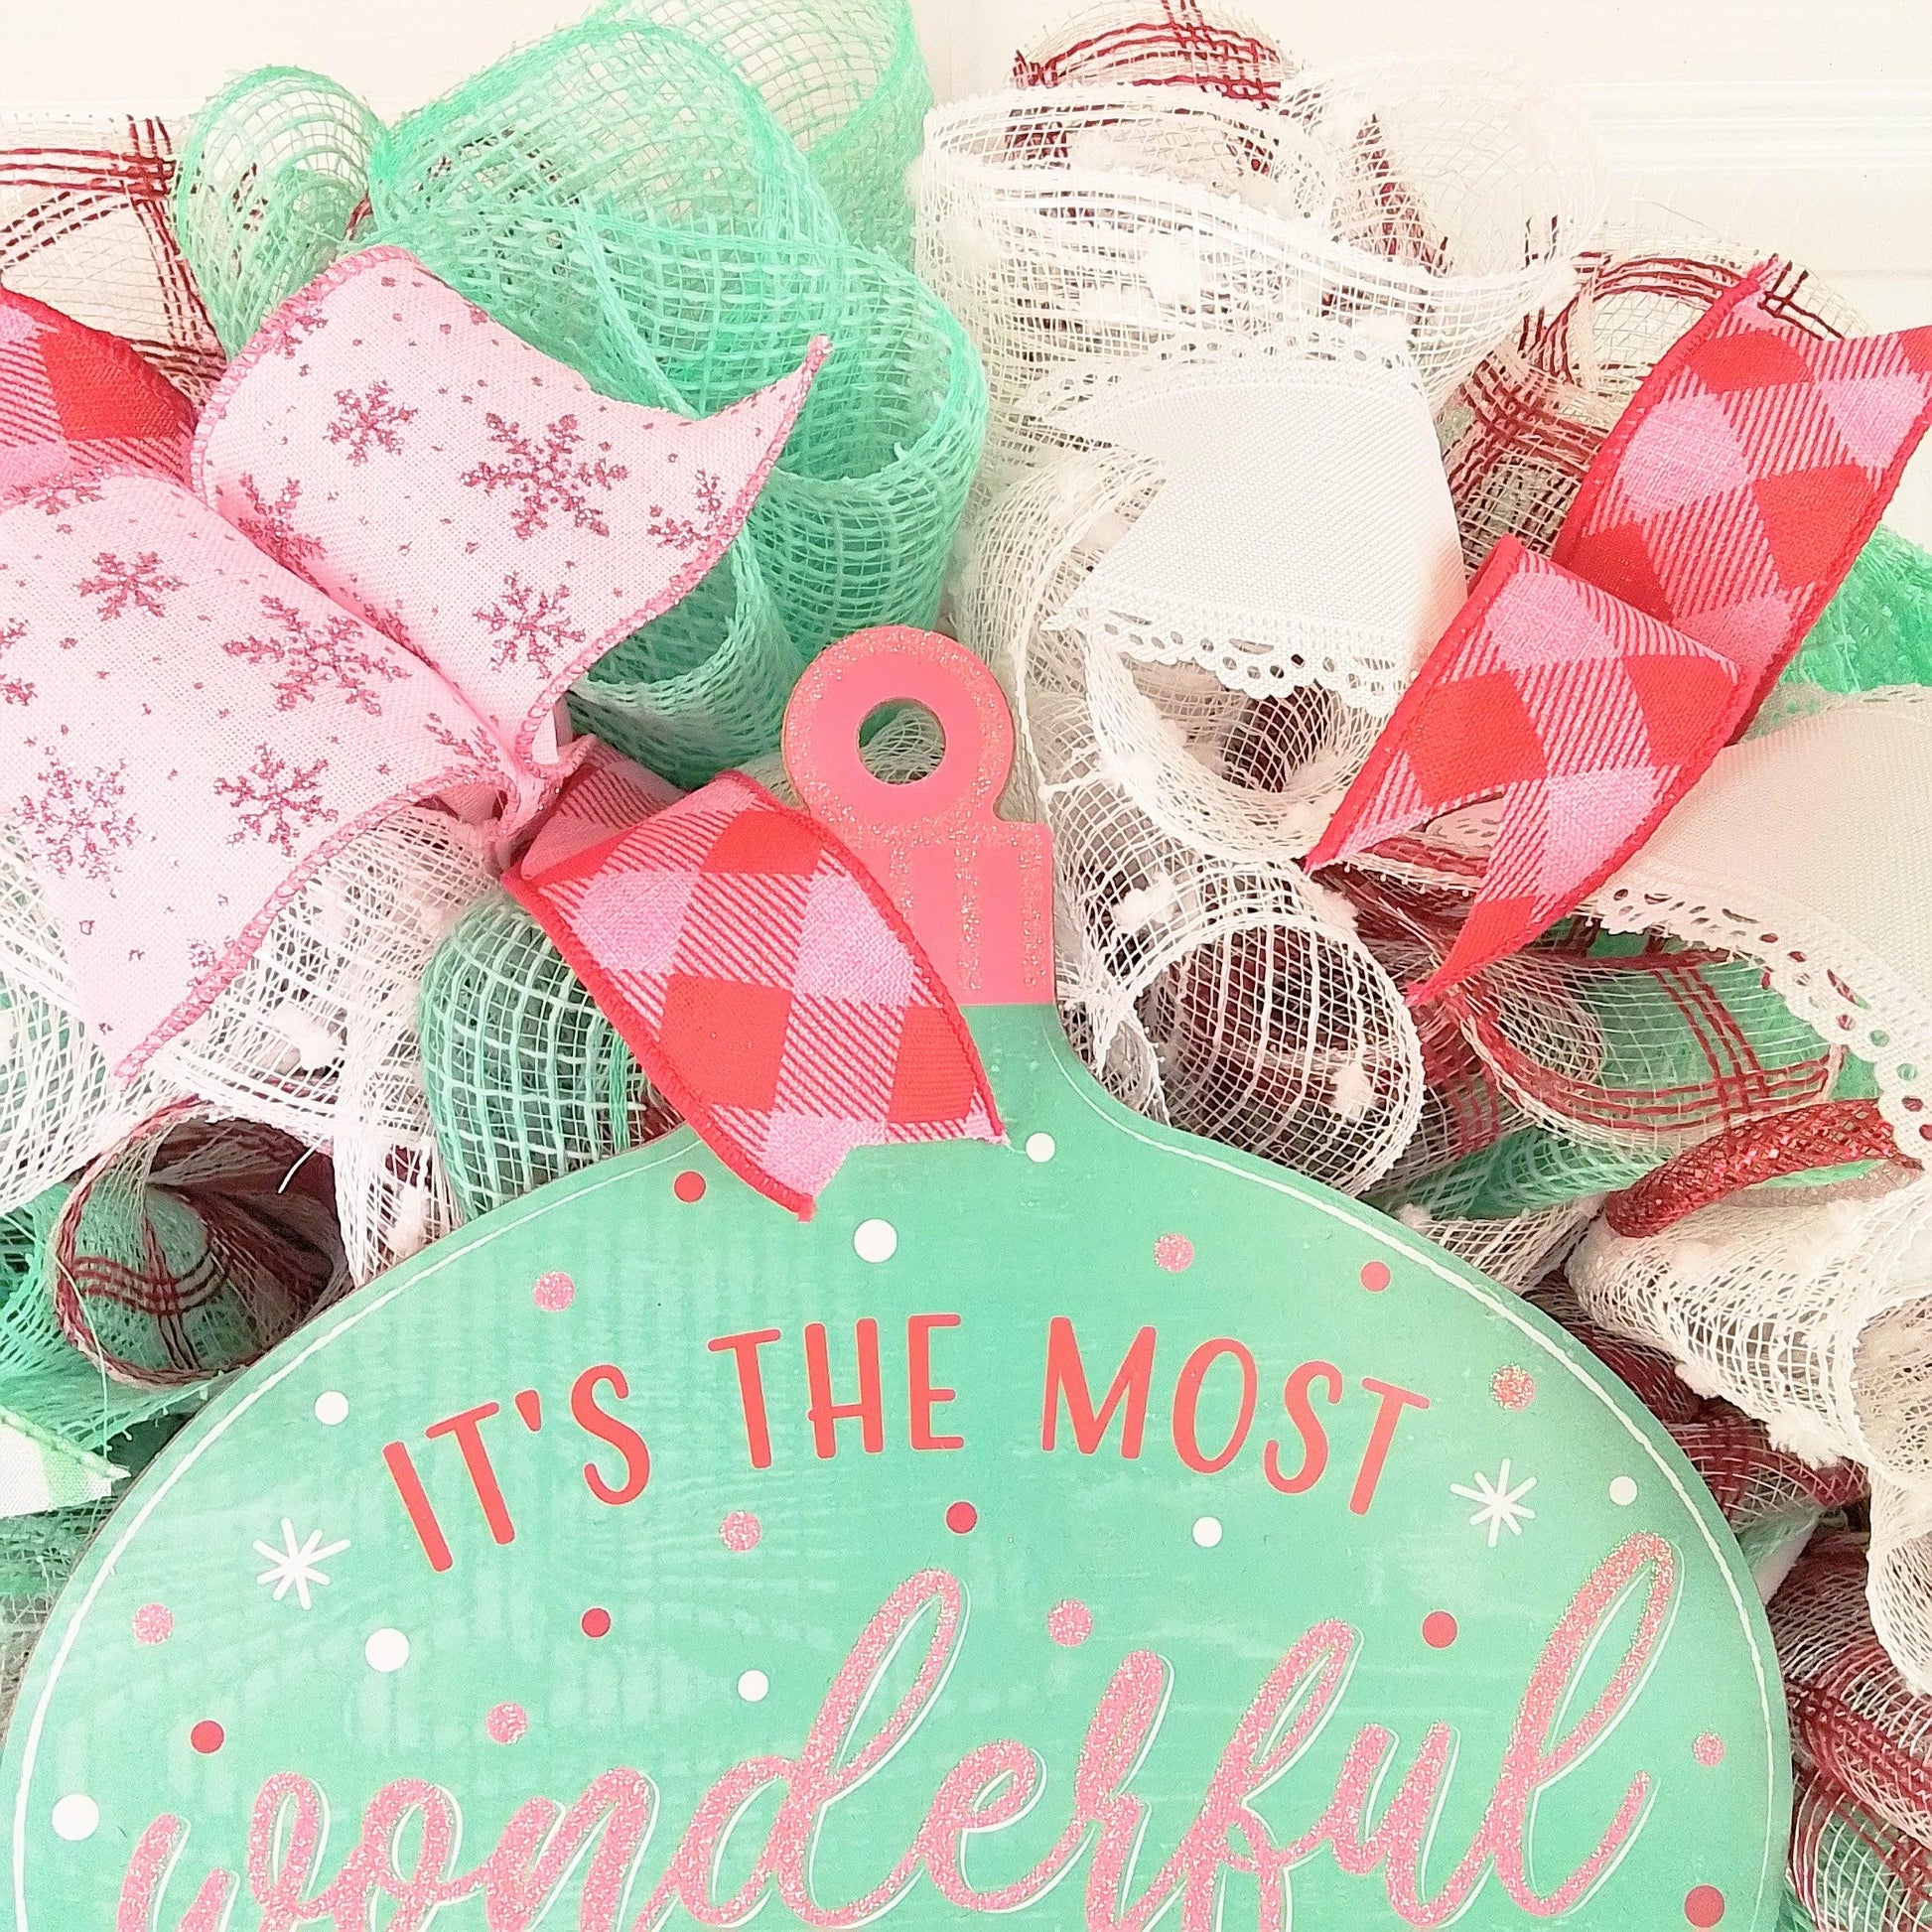 It's the Most Wonderful Time of the Year Ornament Wreath - Holiday Mesh Front Door Decor - Mint Green Red Pink - Pink Door Wreaths